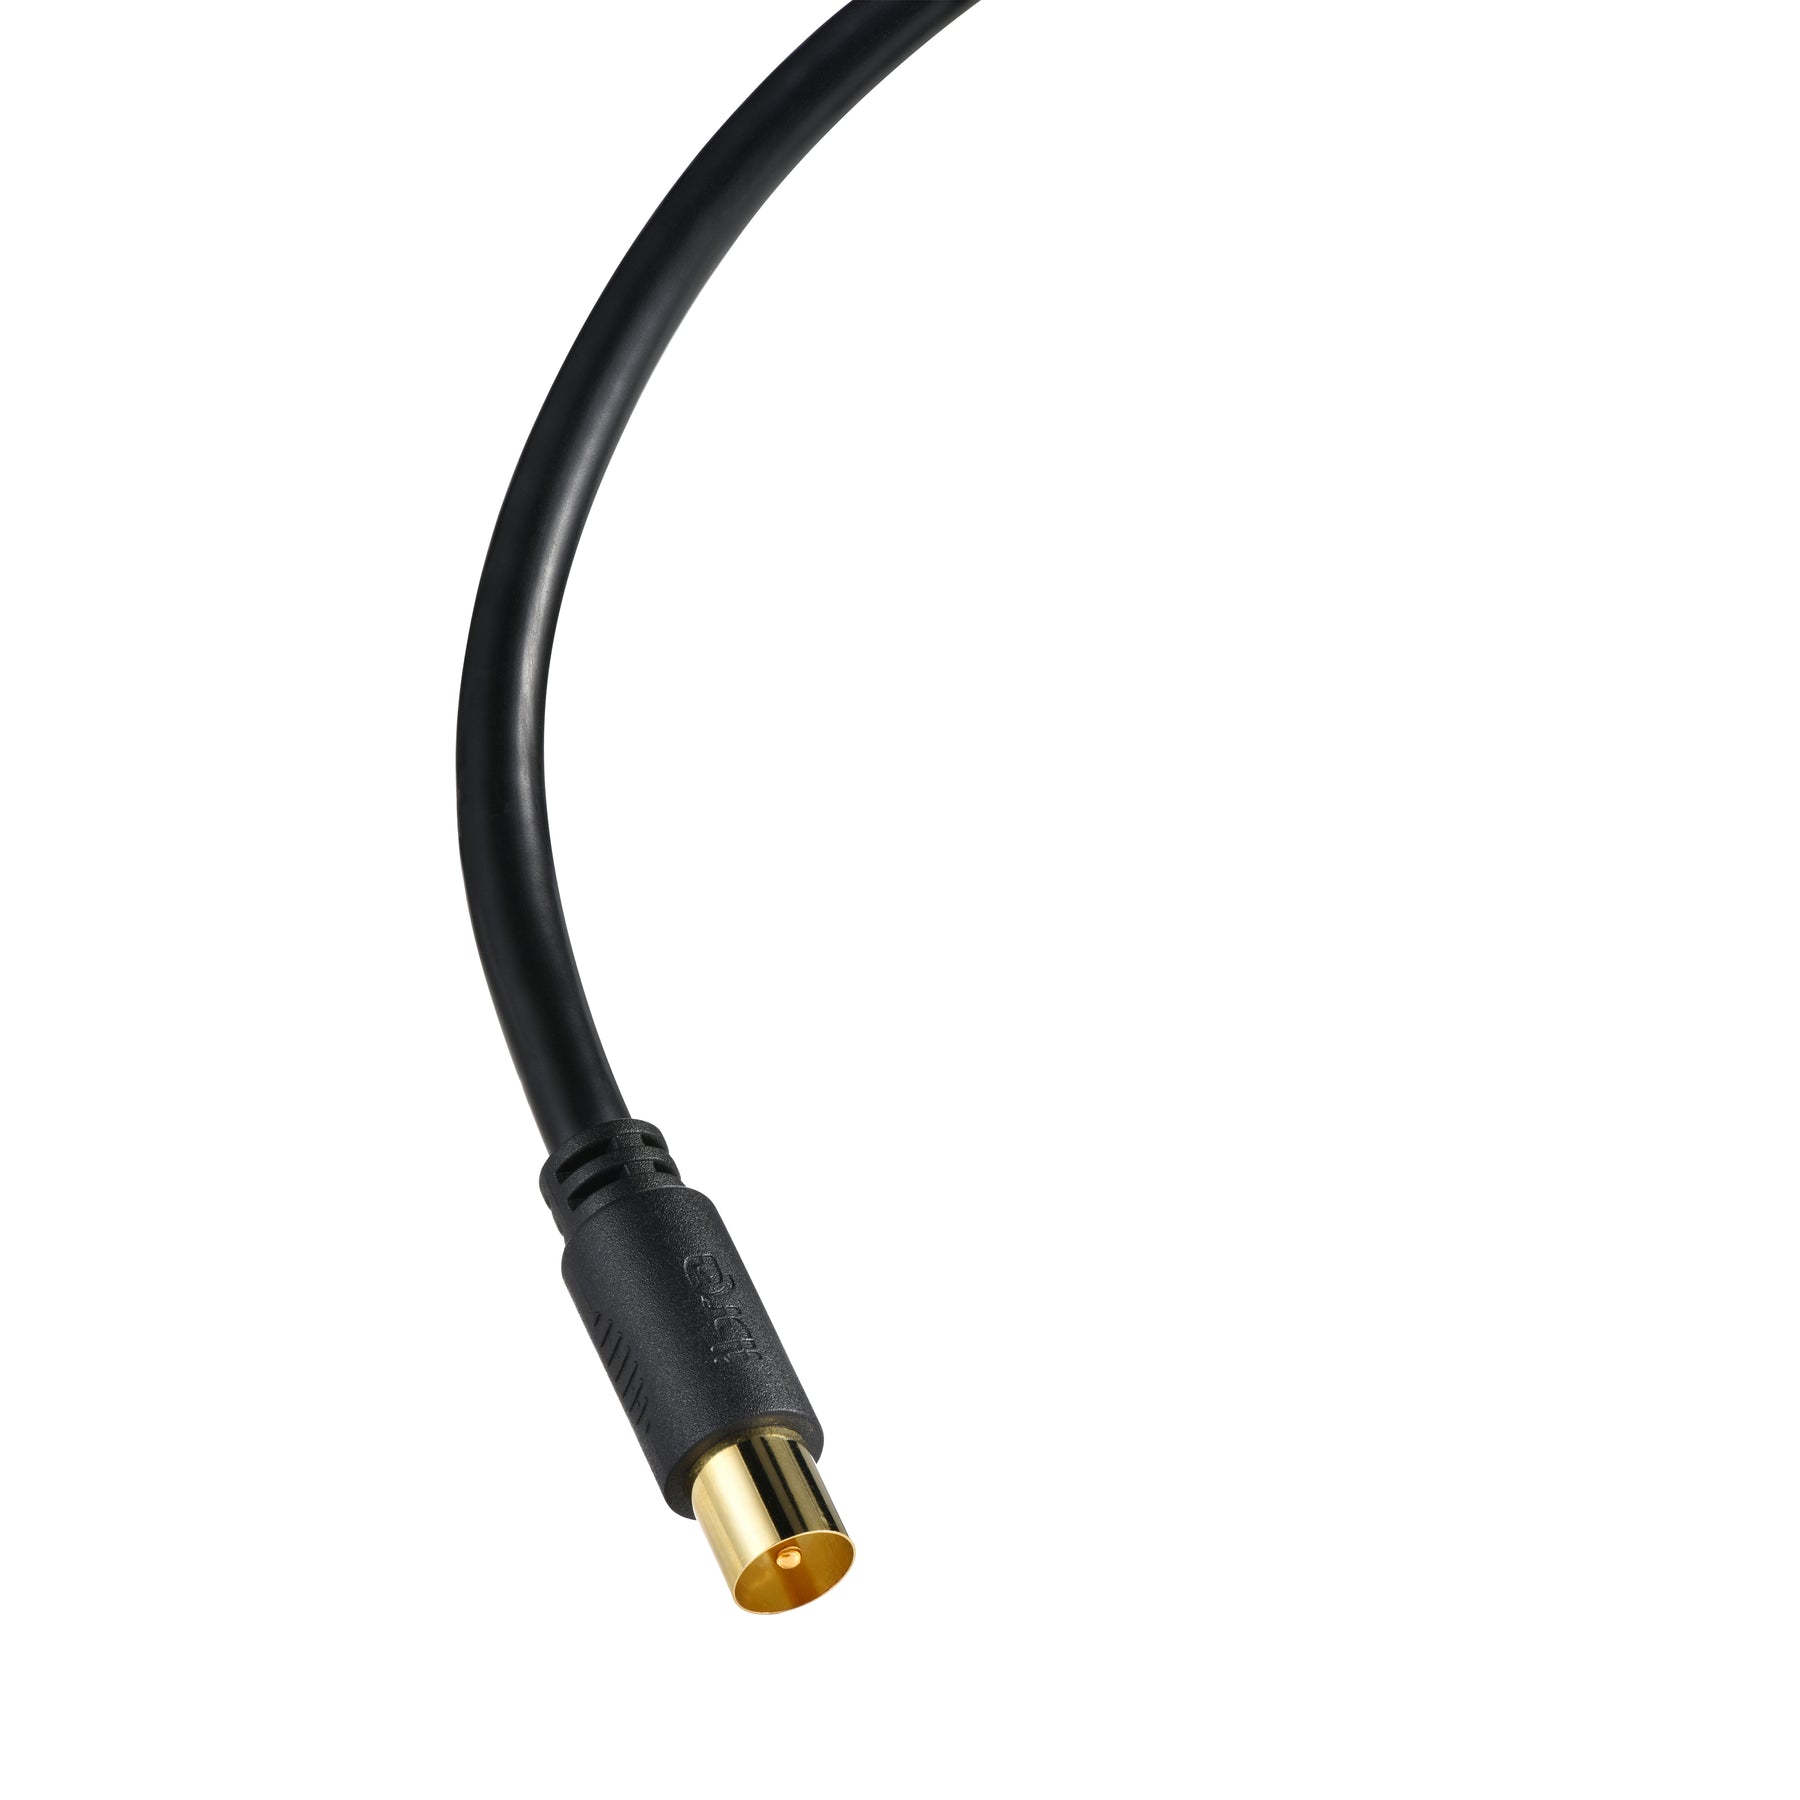 IBRA Aerial Coaxial Cable 4M with Gold-Plated Connectors, Male to Male RF Coax Lead with Female Adapter Coupler for Freeview, Freesat, Sky, Virgin, BT, You View, Satellite TV - Black